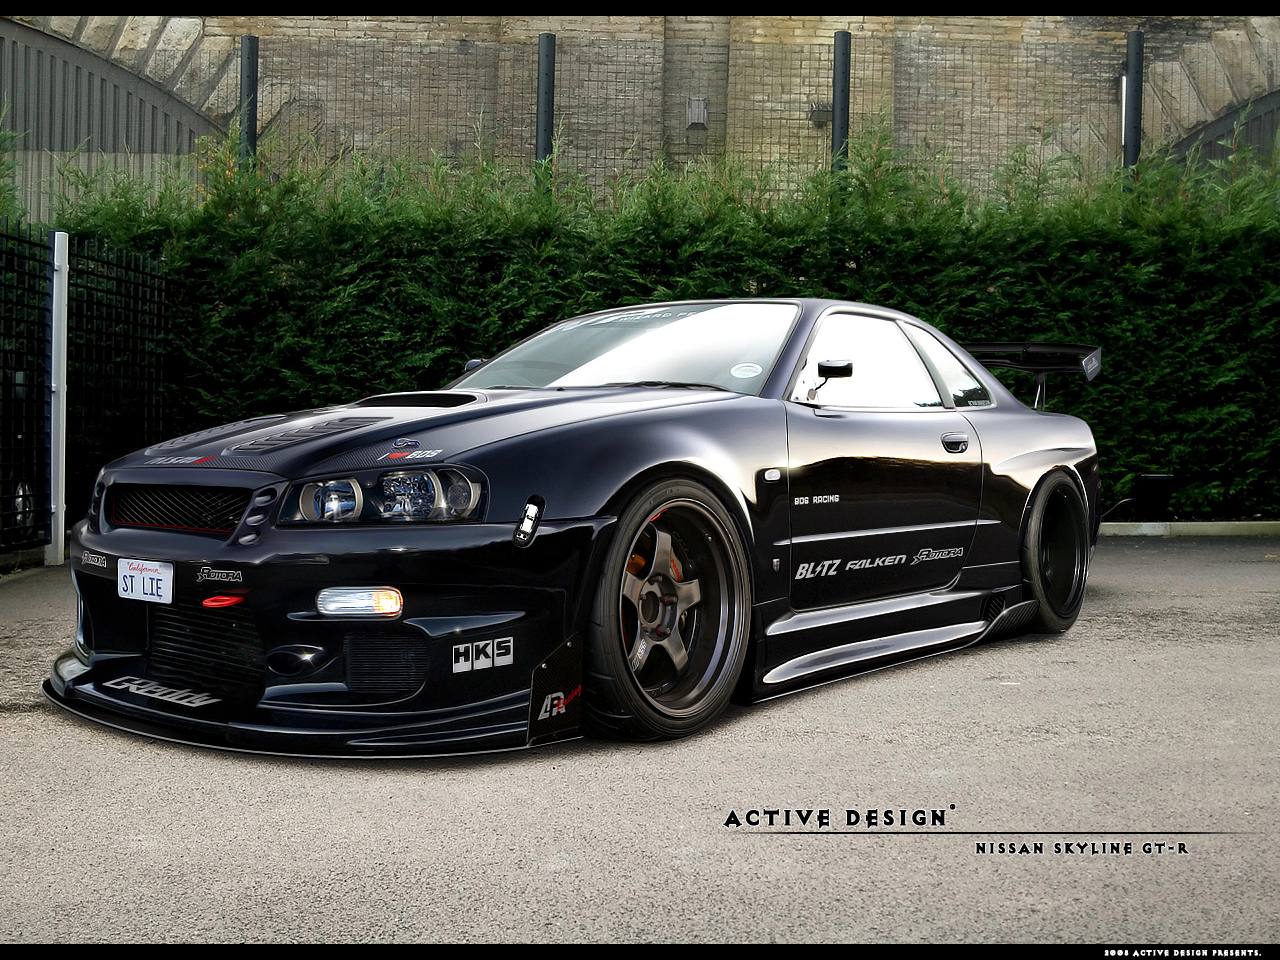 Picture of nissan skylines r34 #9